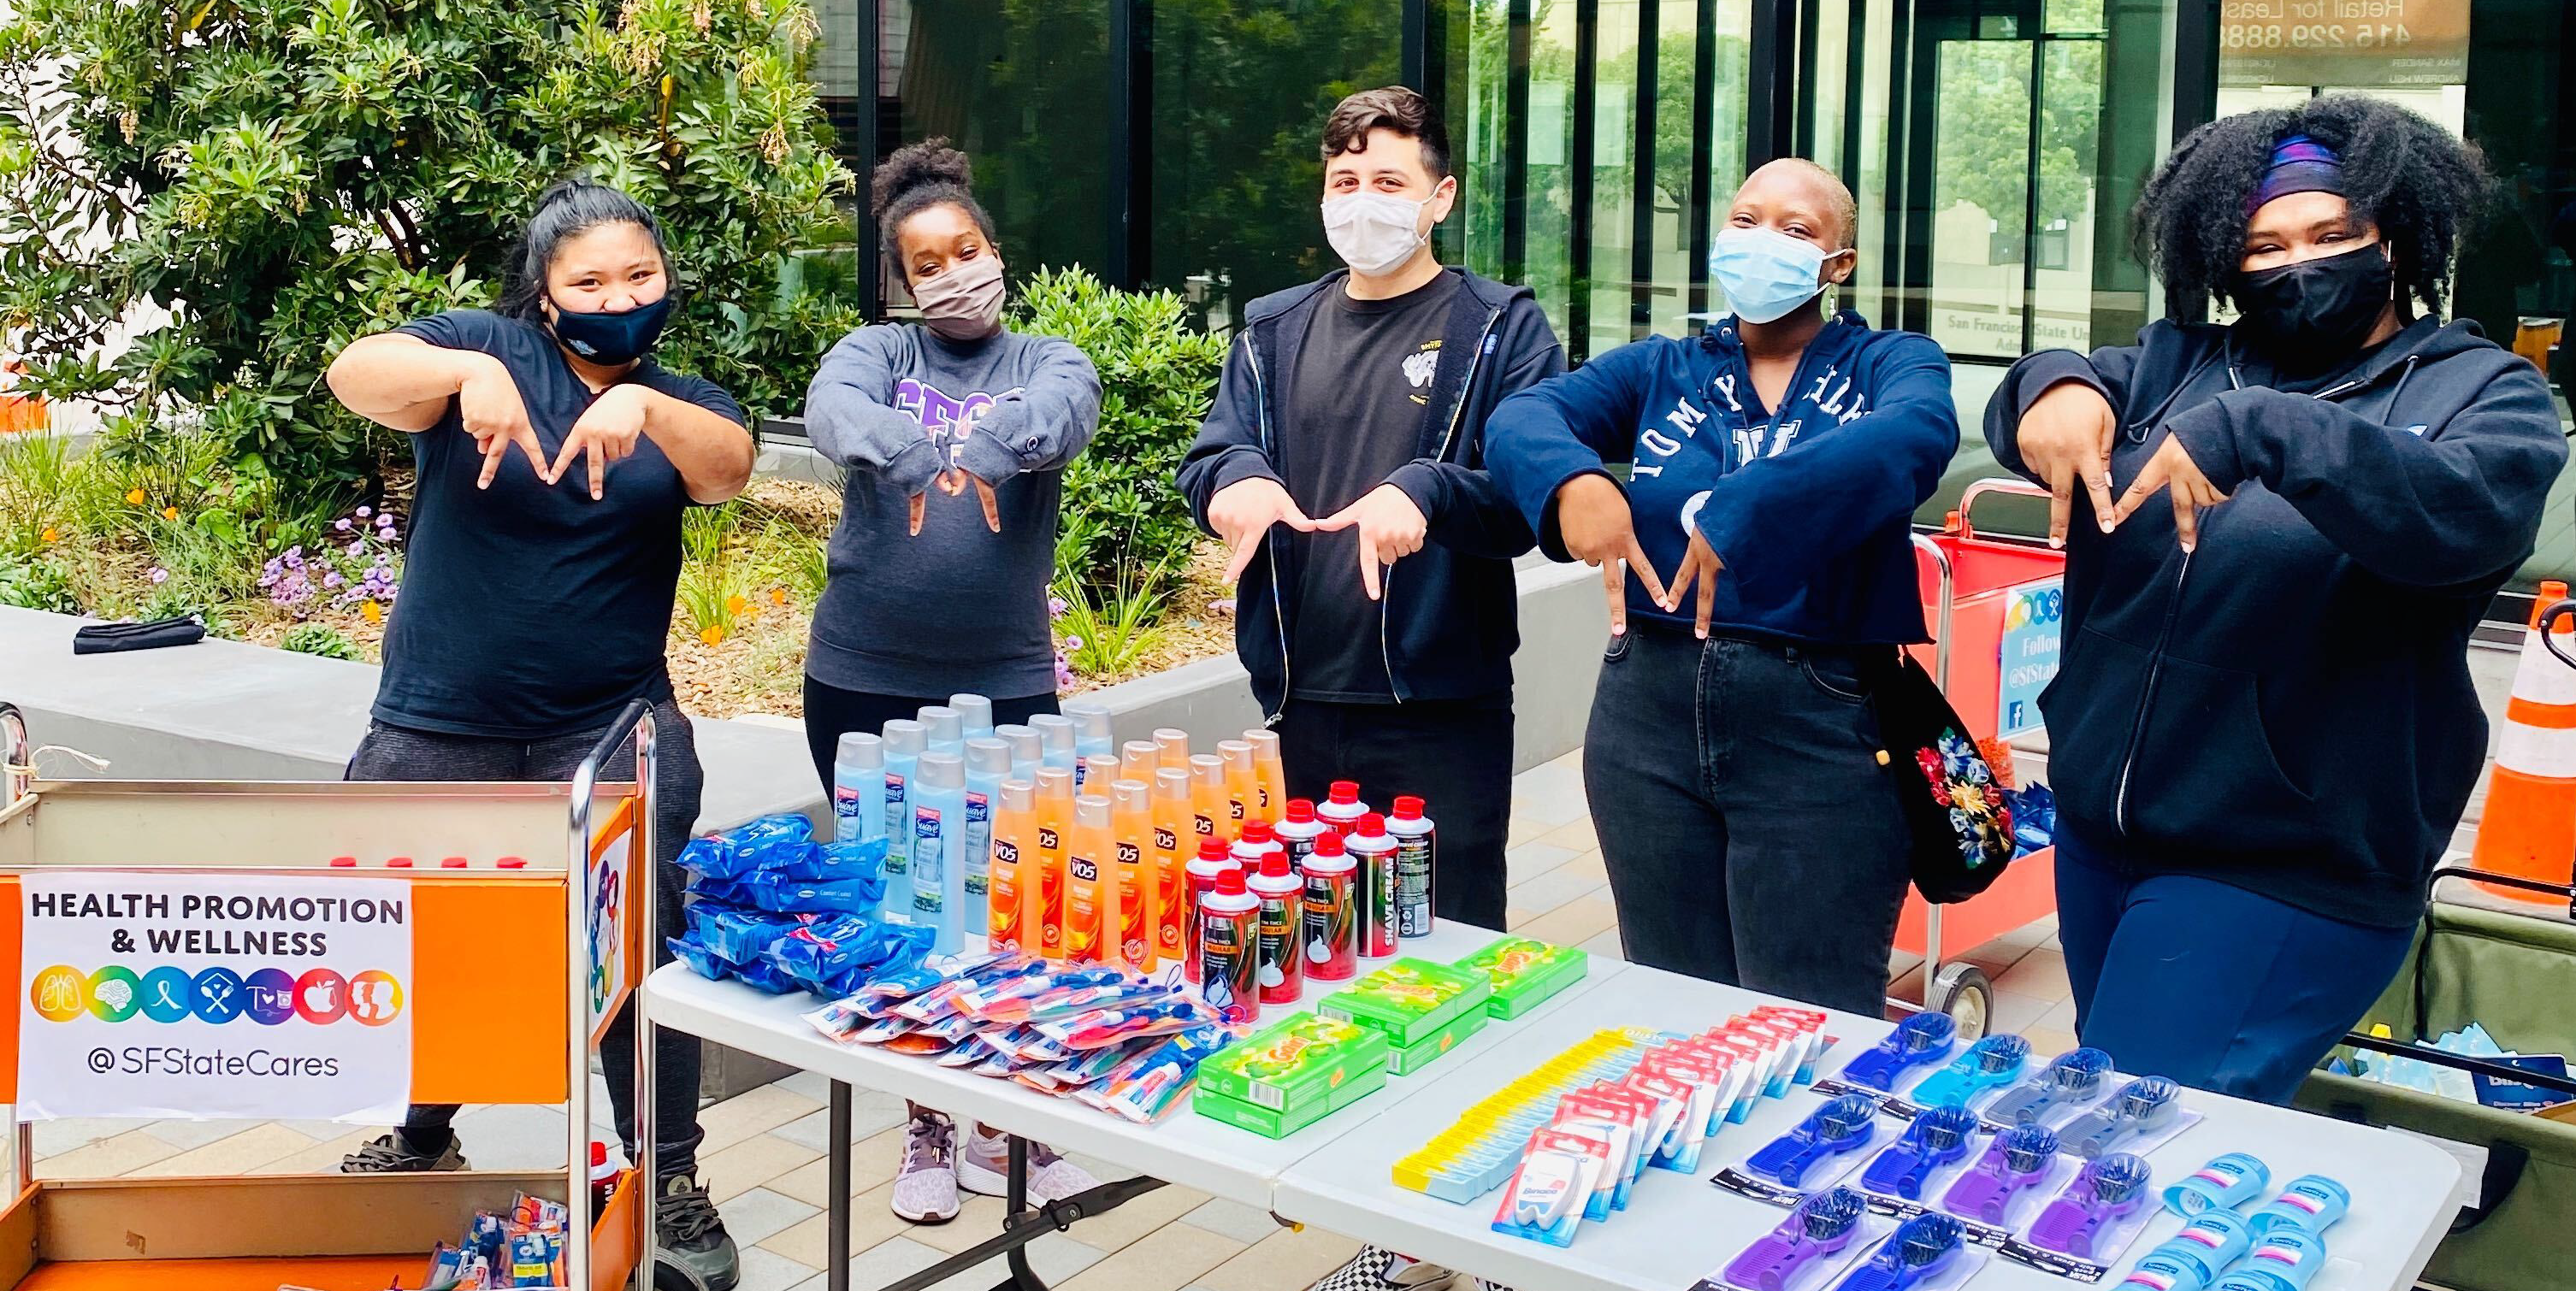 5 individuals wearing dark clothing, demonstrating a hand sign to proudly represent their organization. These individuals are standing behind a table of care and hygiene items to provide to students